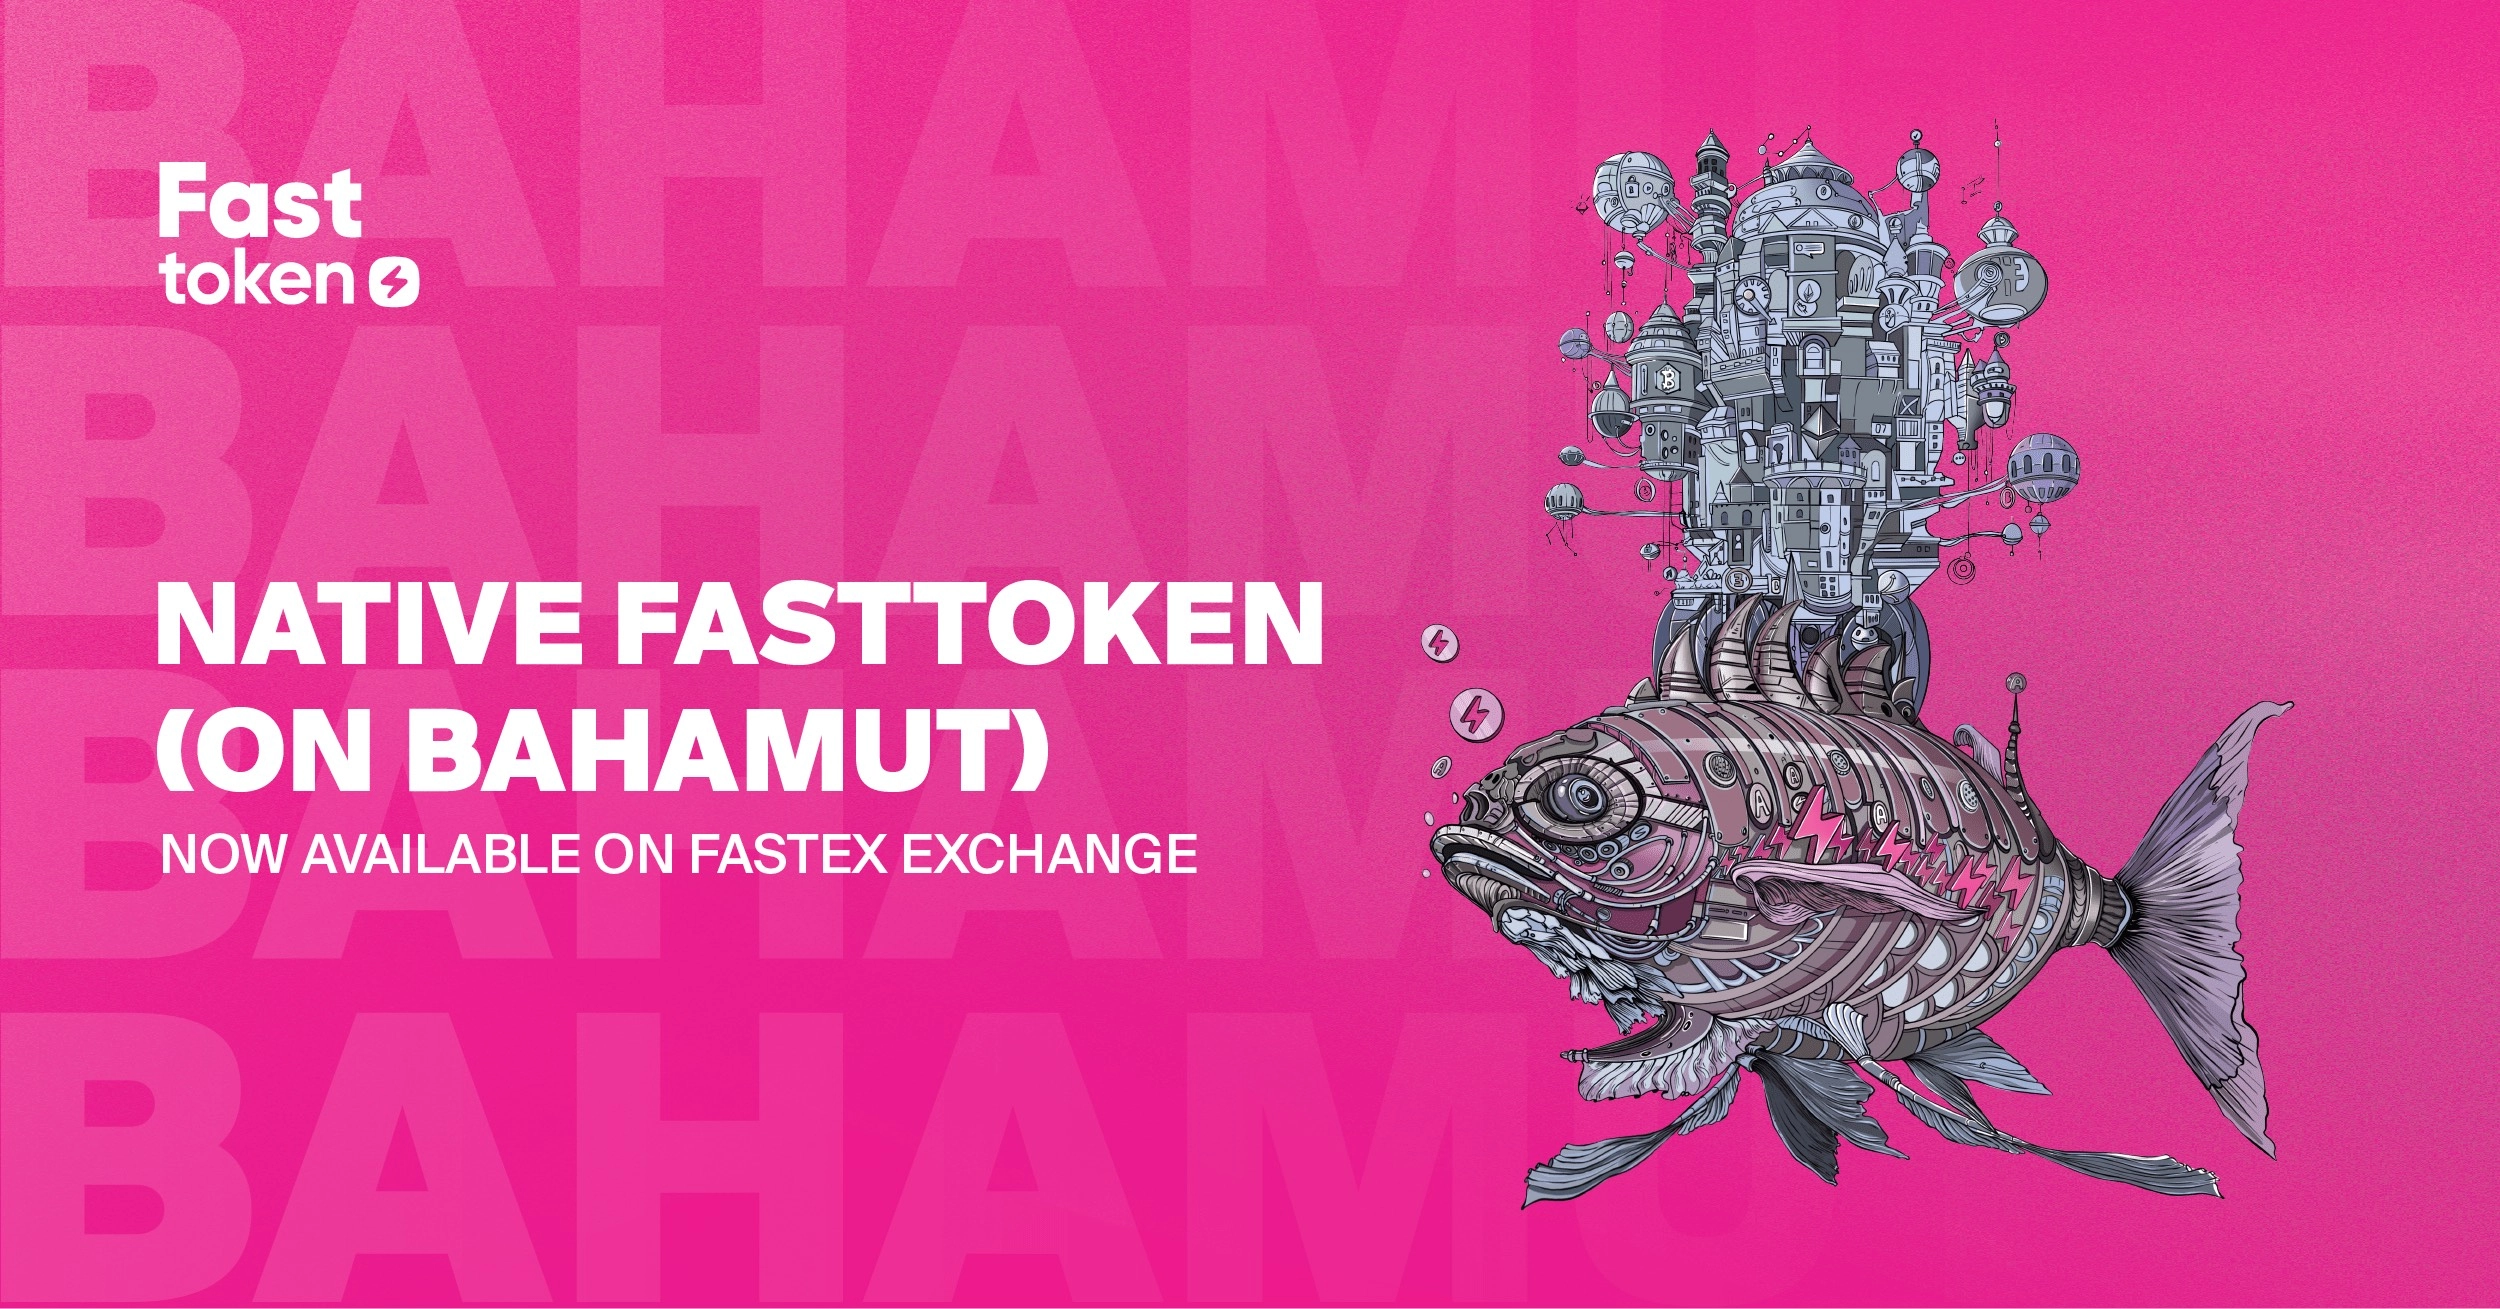    Native Fasttoken (on Bahamut) Deposits and Withdrawals Now Available on Fastex Exchange